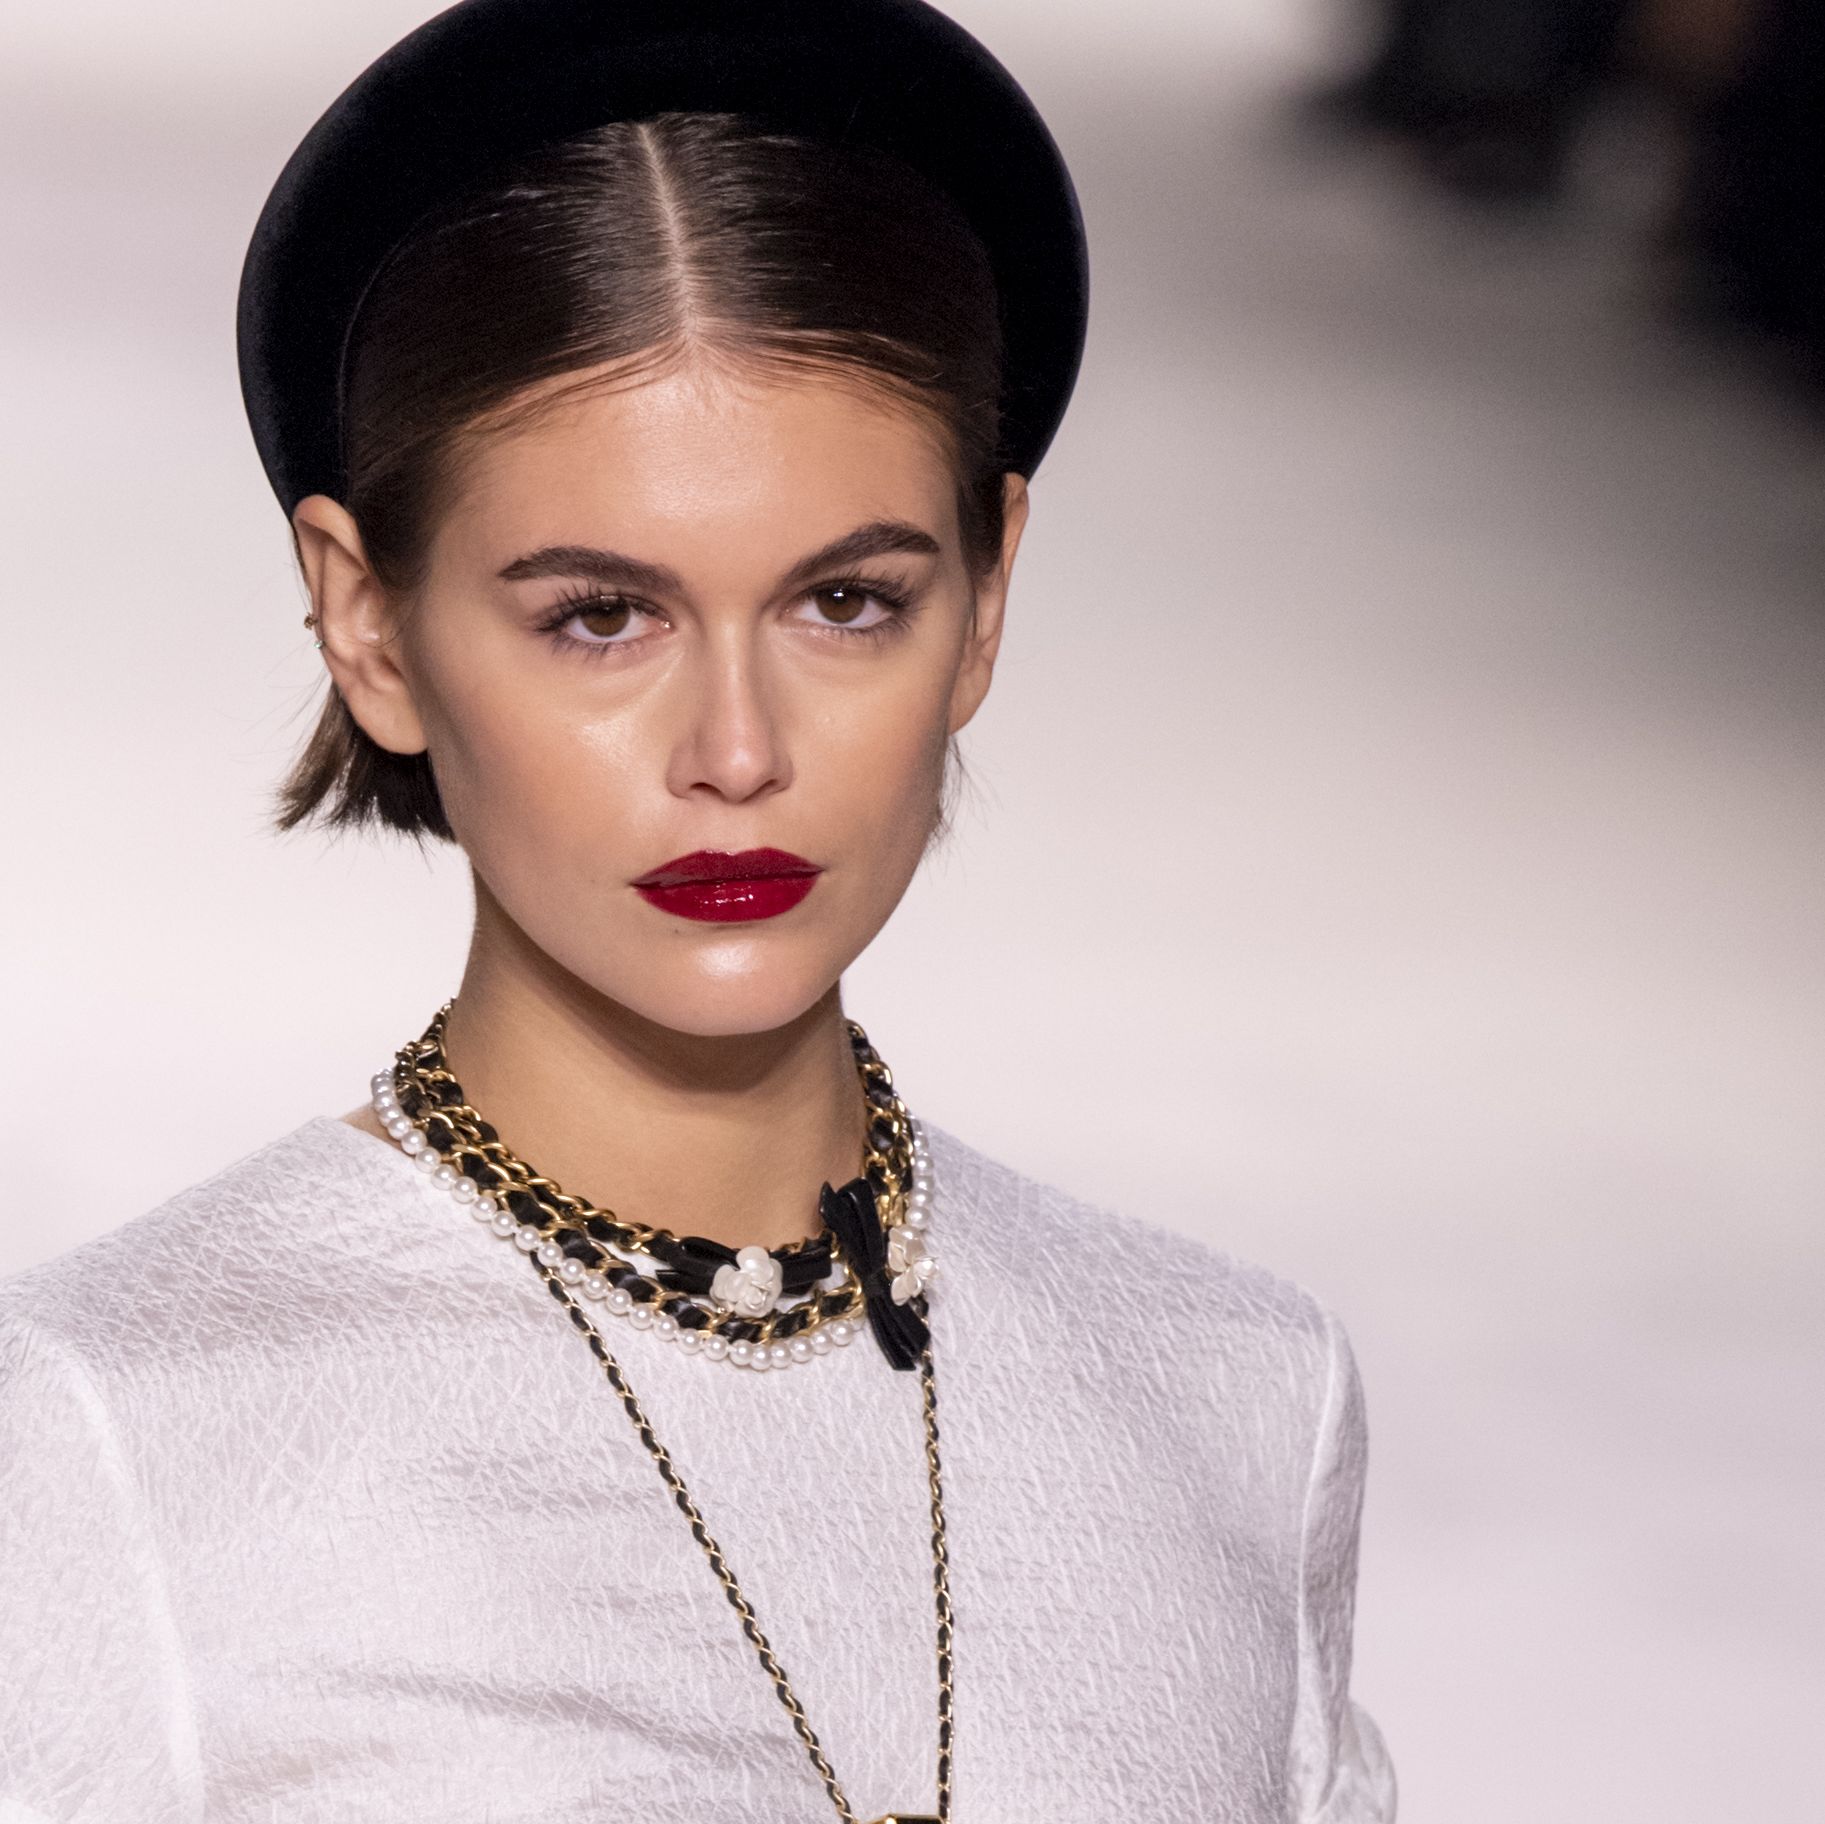 Chanel Metiers D'Art 19/20 Served Up 80s Princess Diana-Inspired Beauty